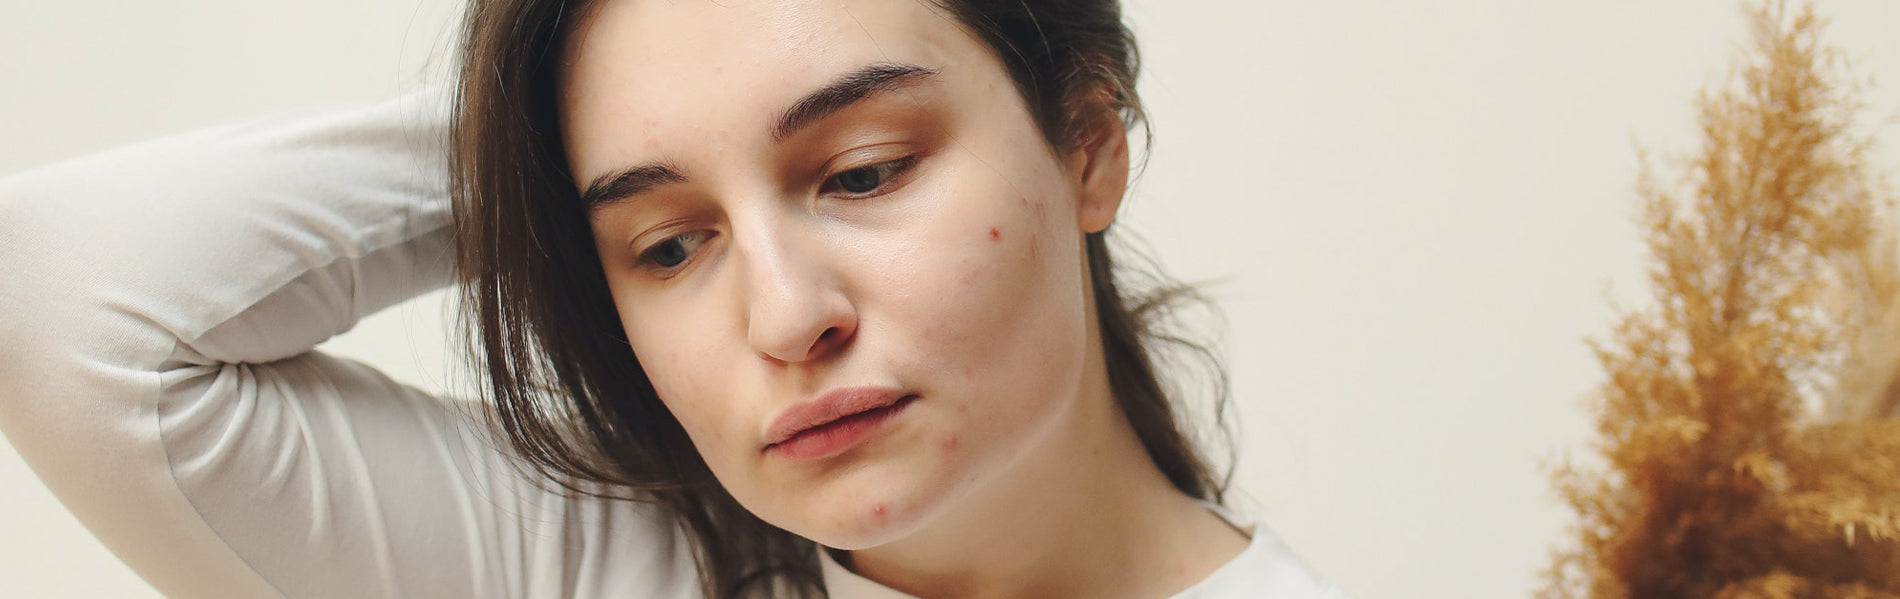 How to Identify and Treat Every Type of Acne